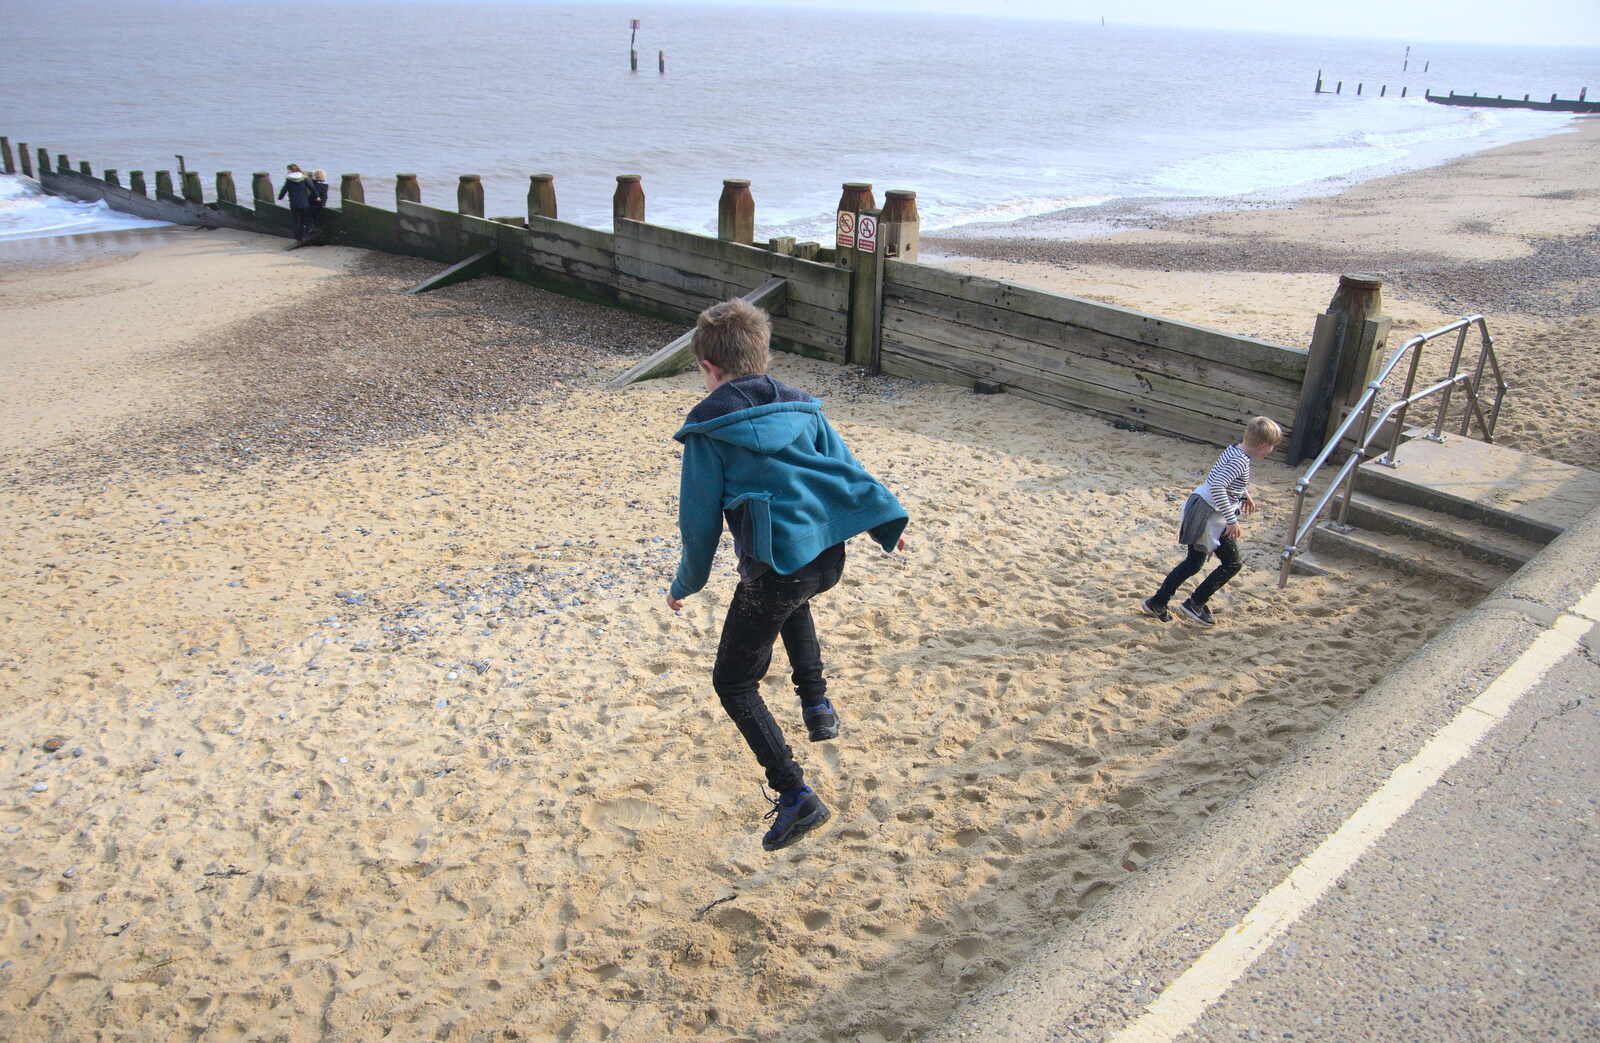 Fred leaps off another wall from On The Beach, Southwold, Suffolk - 7th April 2019